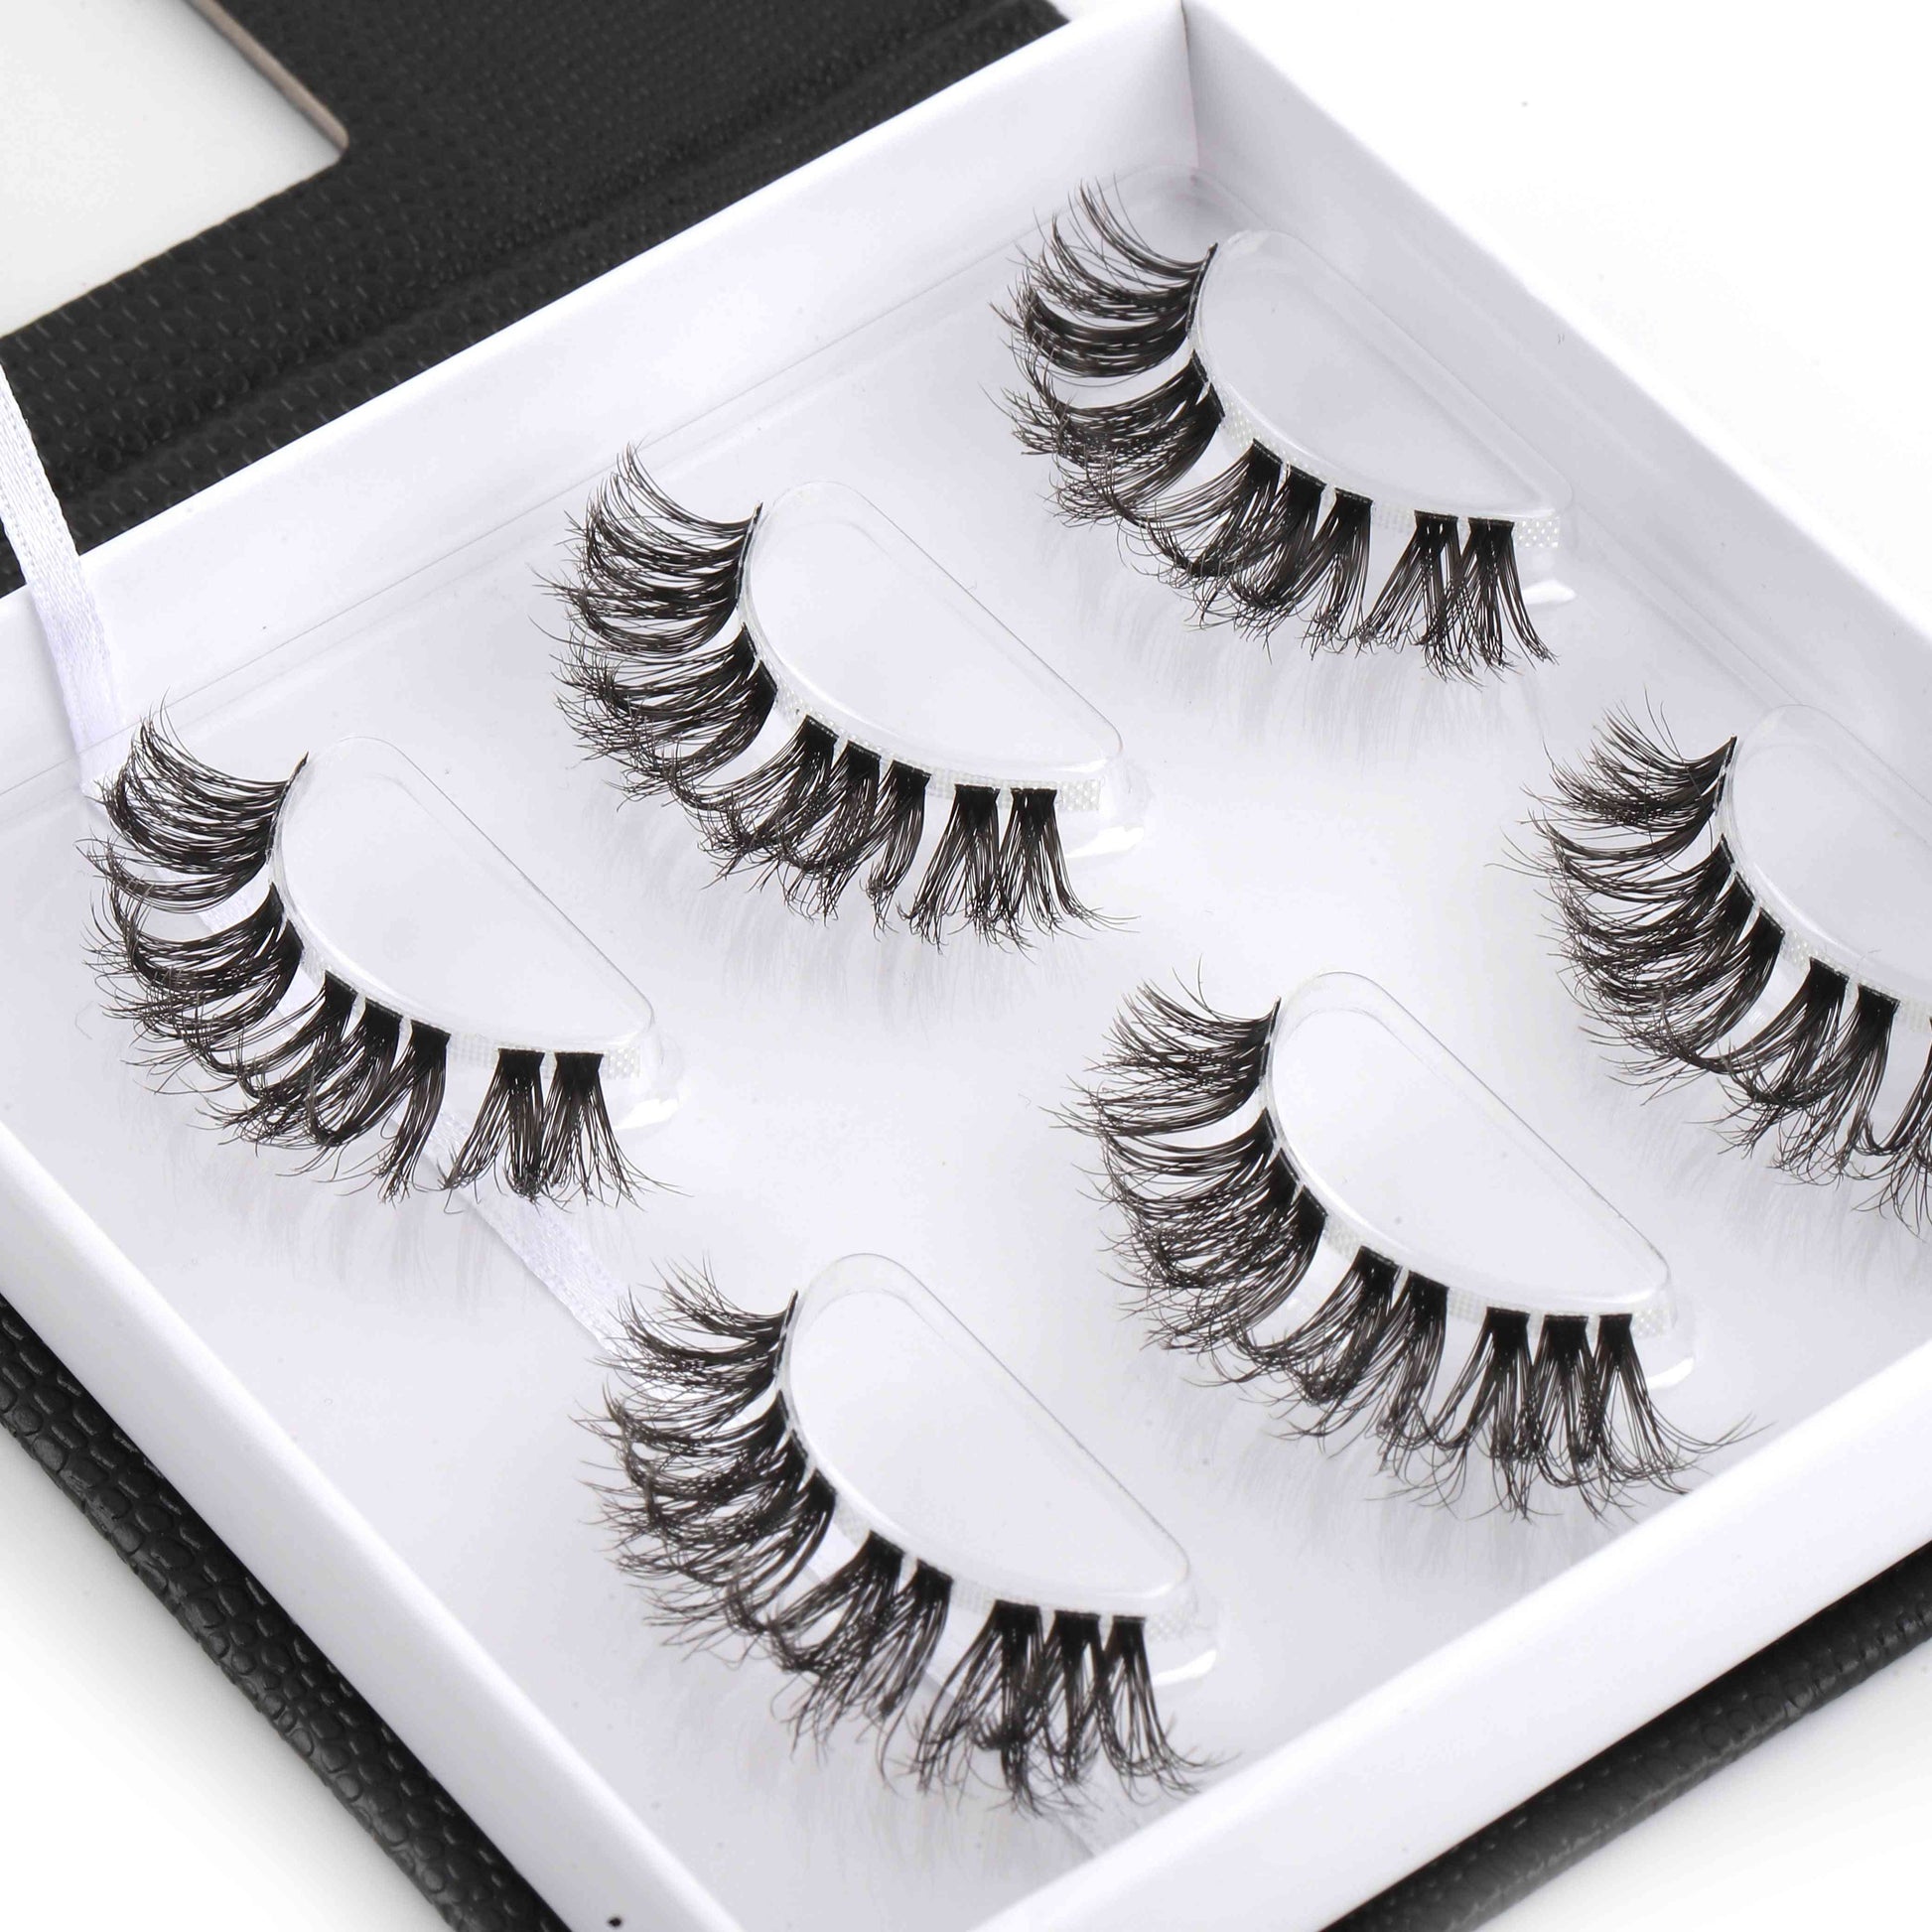 Midi volume lash extensions | hybrid lash extensions | wispy hybrid lash clusters | cluster eyelashes |Aera brings you affordable beauty through our all in one DIY eyelash extensions that you can apply from the ease of your home.